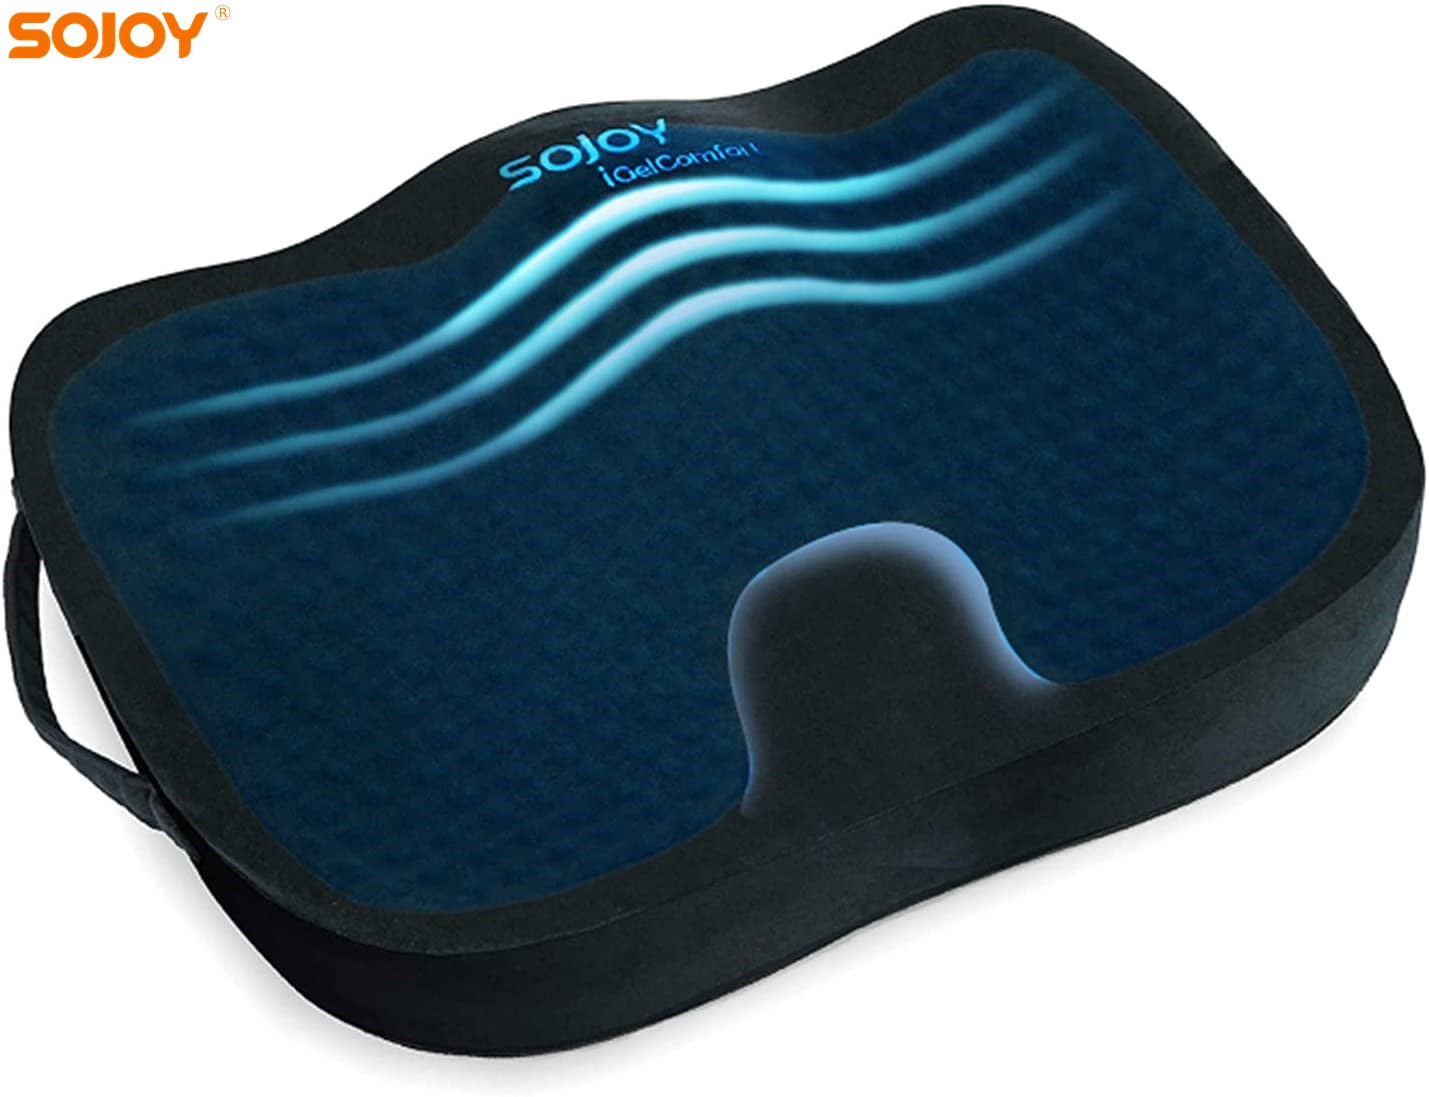 Sojoy iGelComfort Gel Enhanced Memory Foam Seat Cushion-Home Office Chair Pad for Tailbone Back Pain by Sojoy